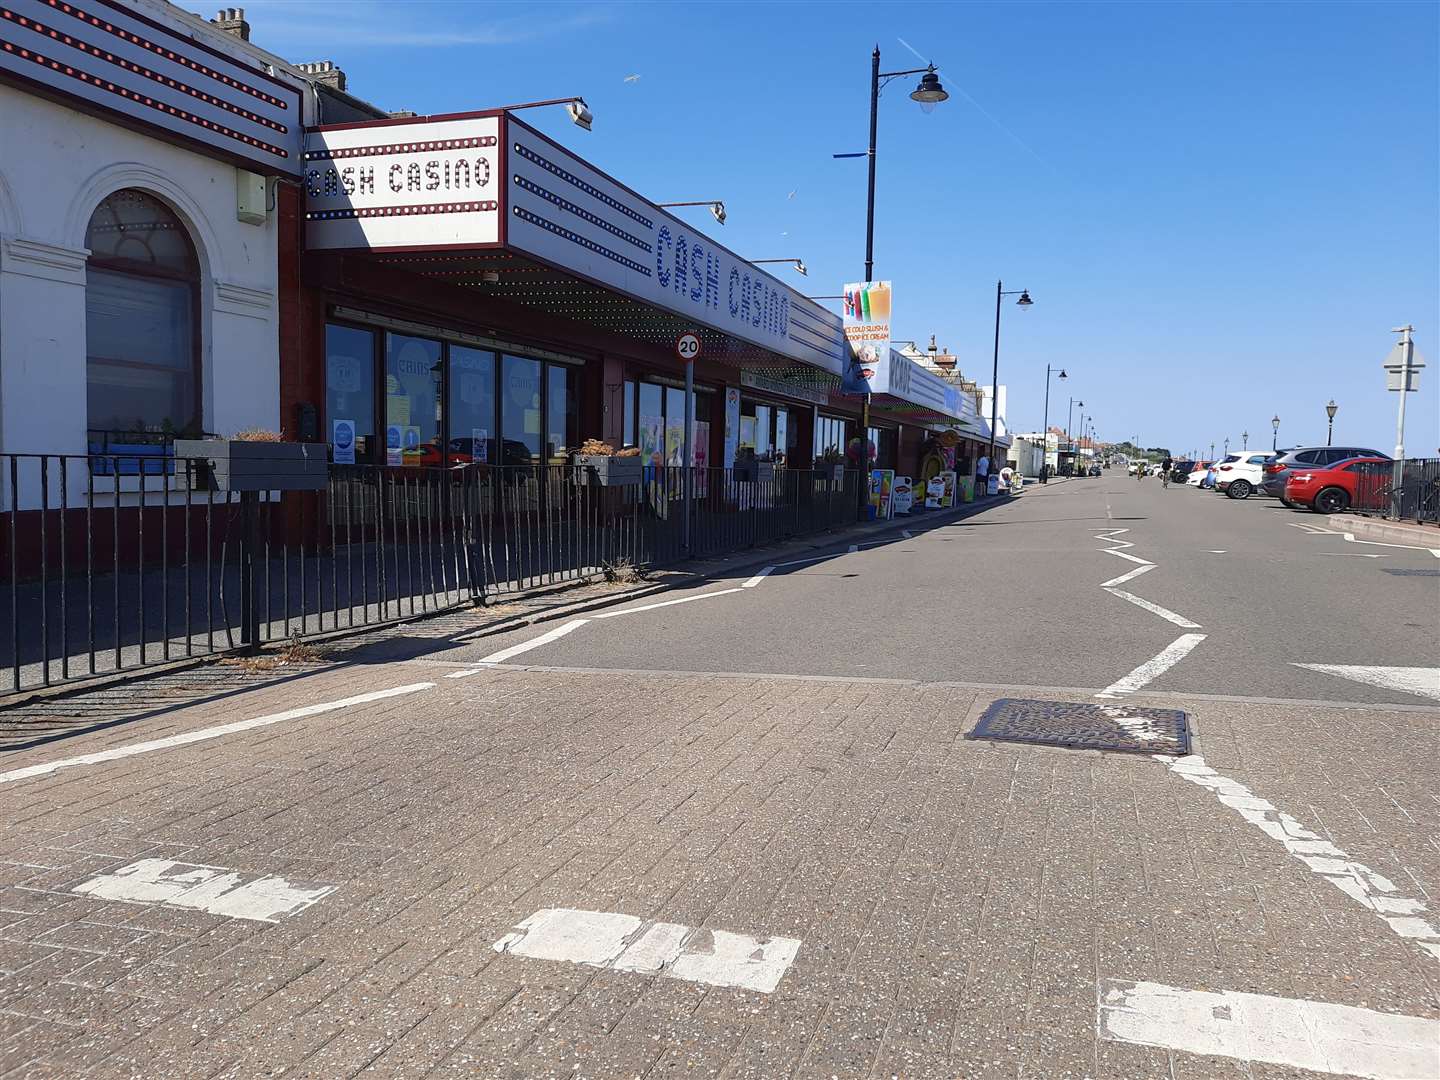 It is understood that the stretch of Central Parade between Pier Avenue and Lane End could be transformed into a one-way system